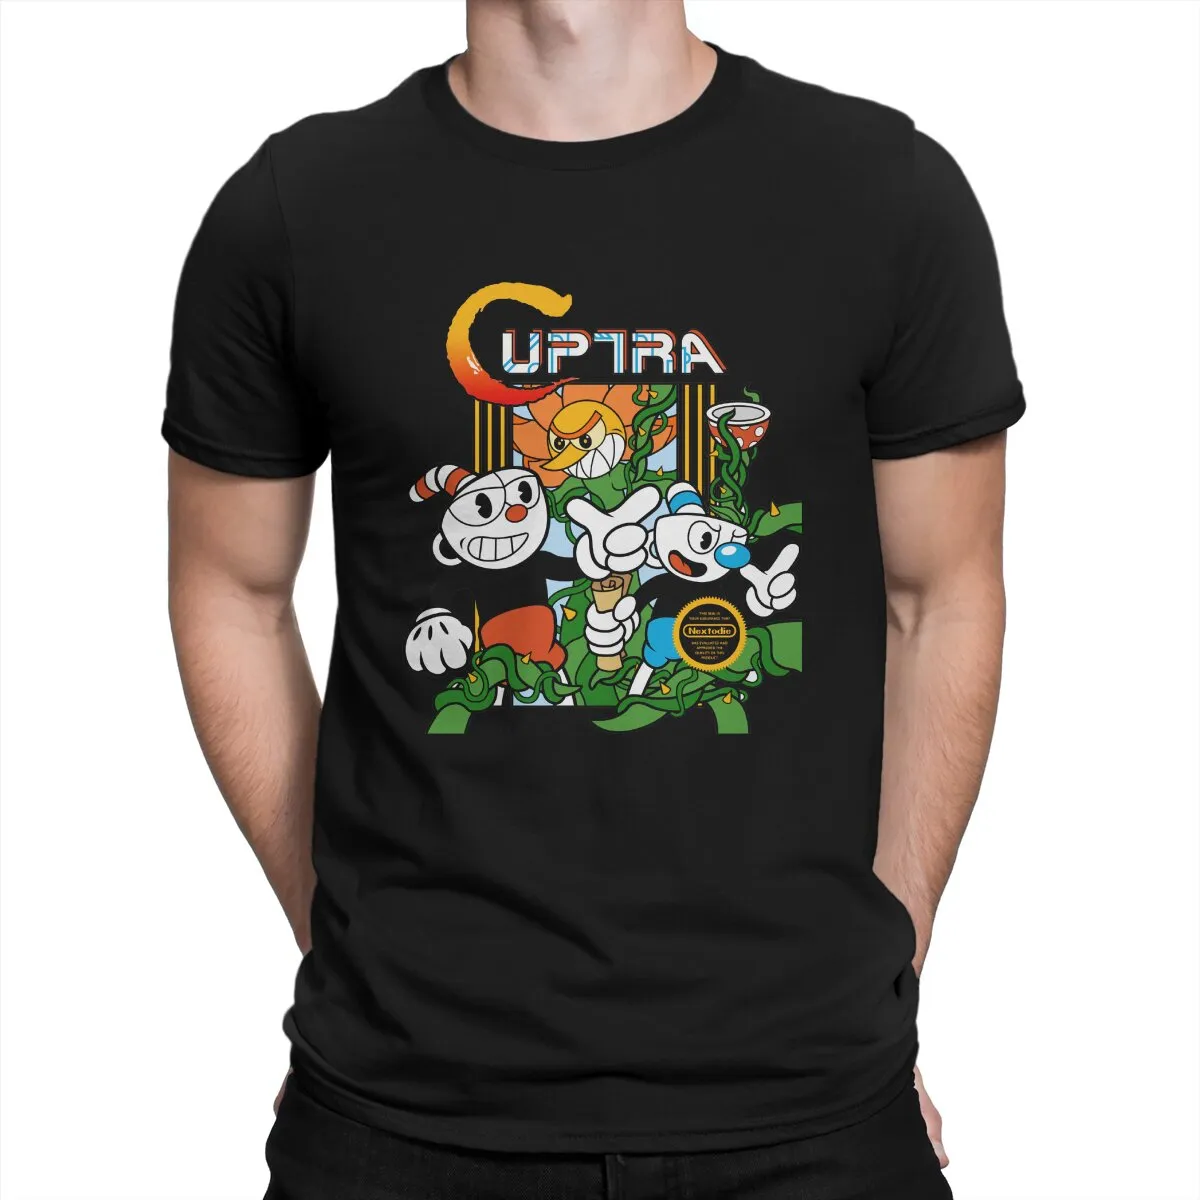 Cuphead Ms Chalice Game Men s TShirt Cuptra Distinctive T Shirt Graphic Streetwear New Trend - Cuphead Store